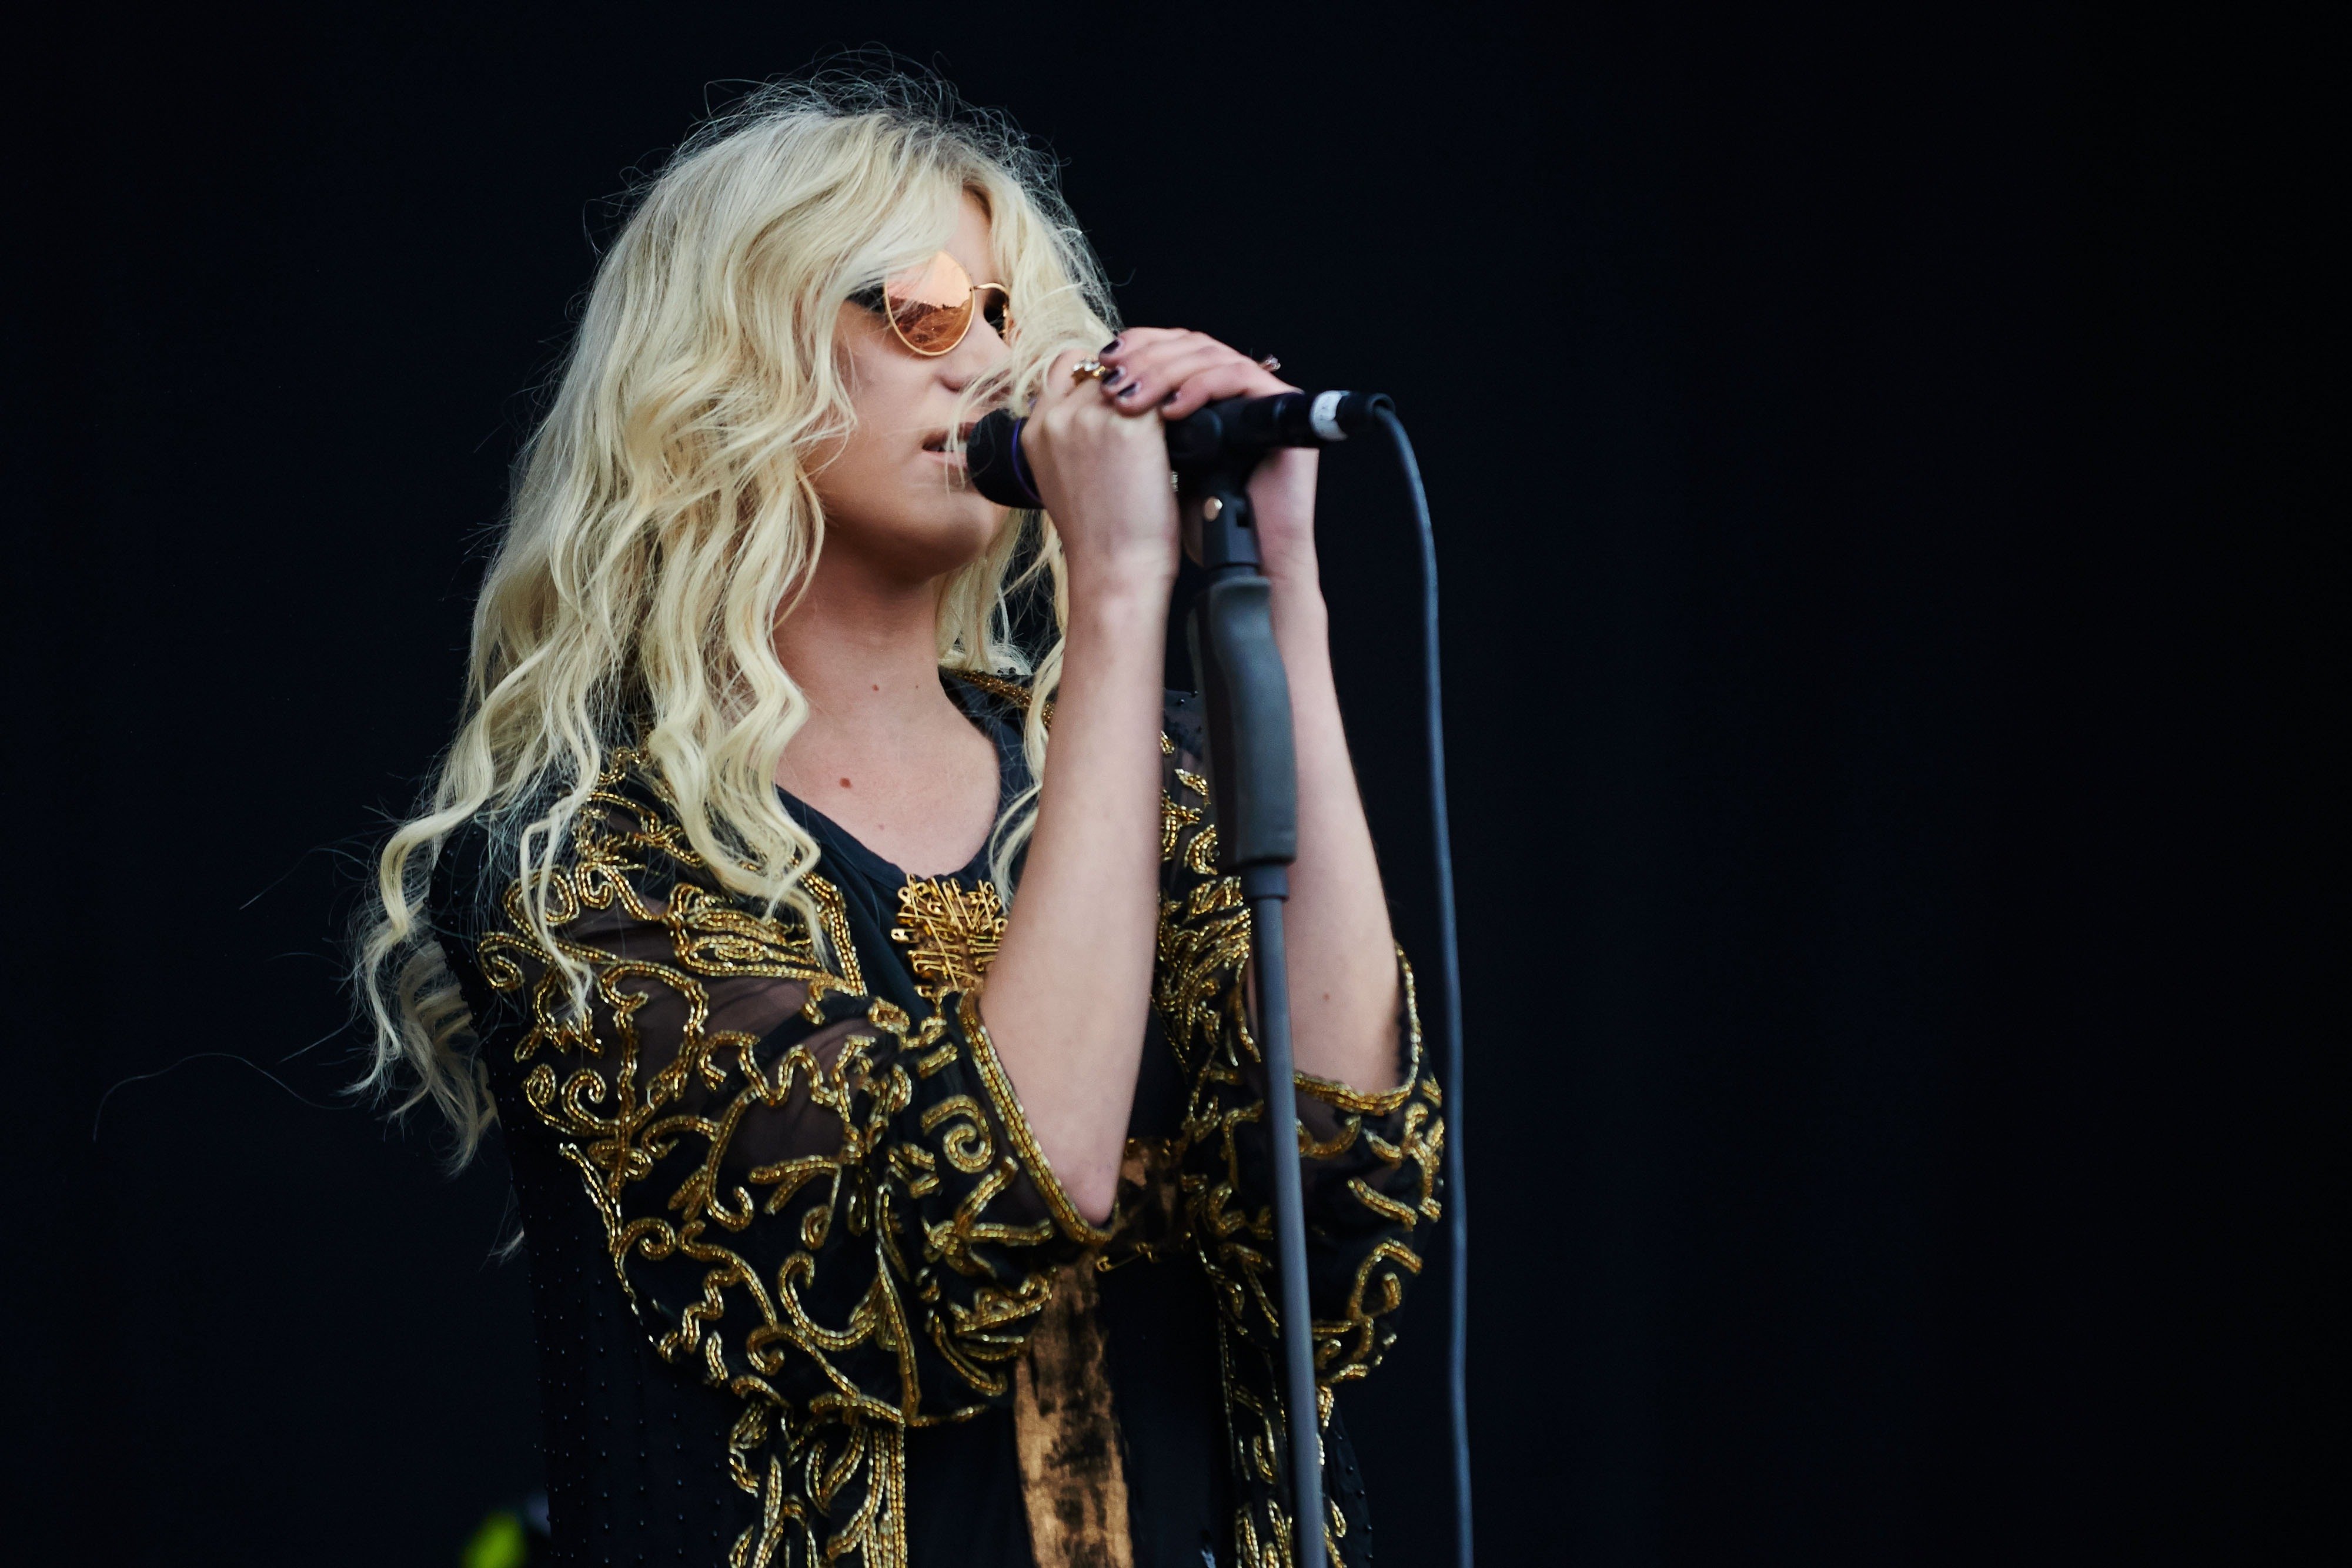 Taylor Momsen performs with her band, The Pretty Reckless in 2014